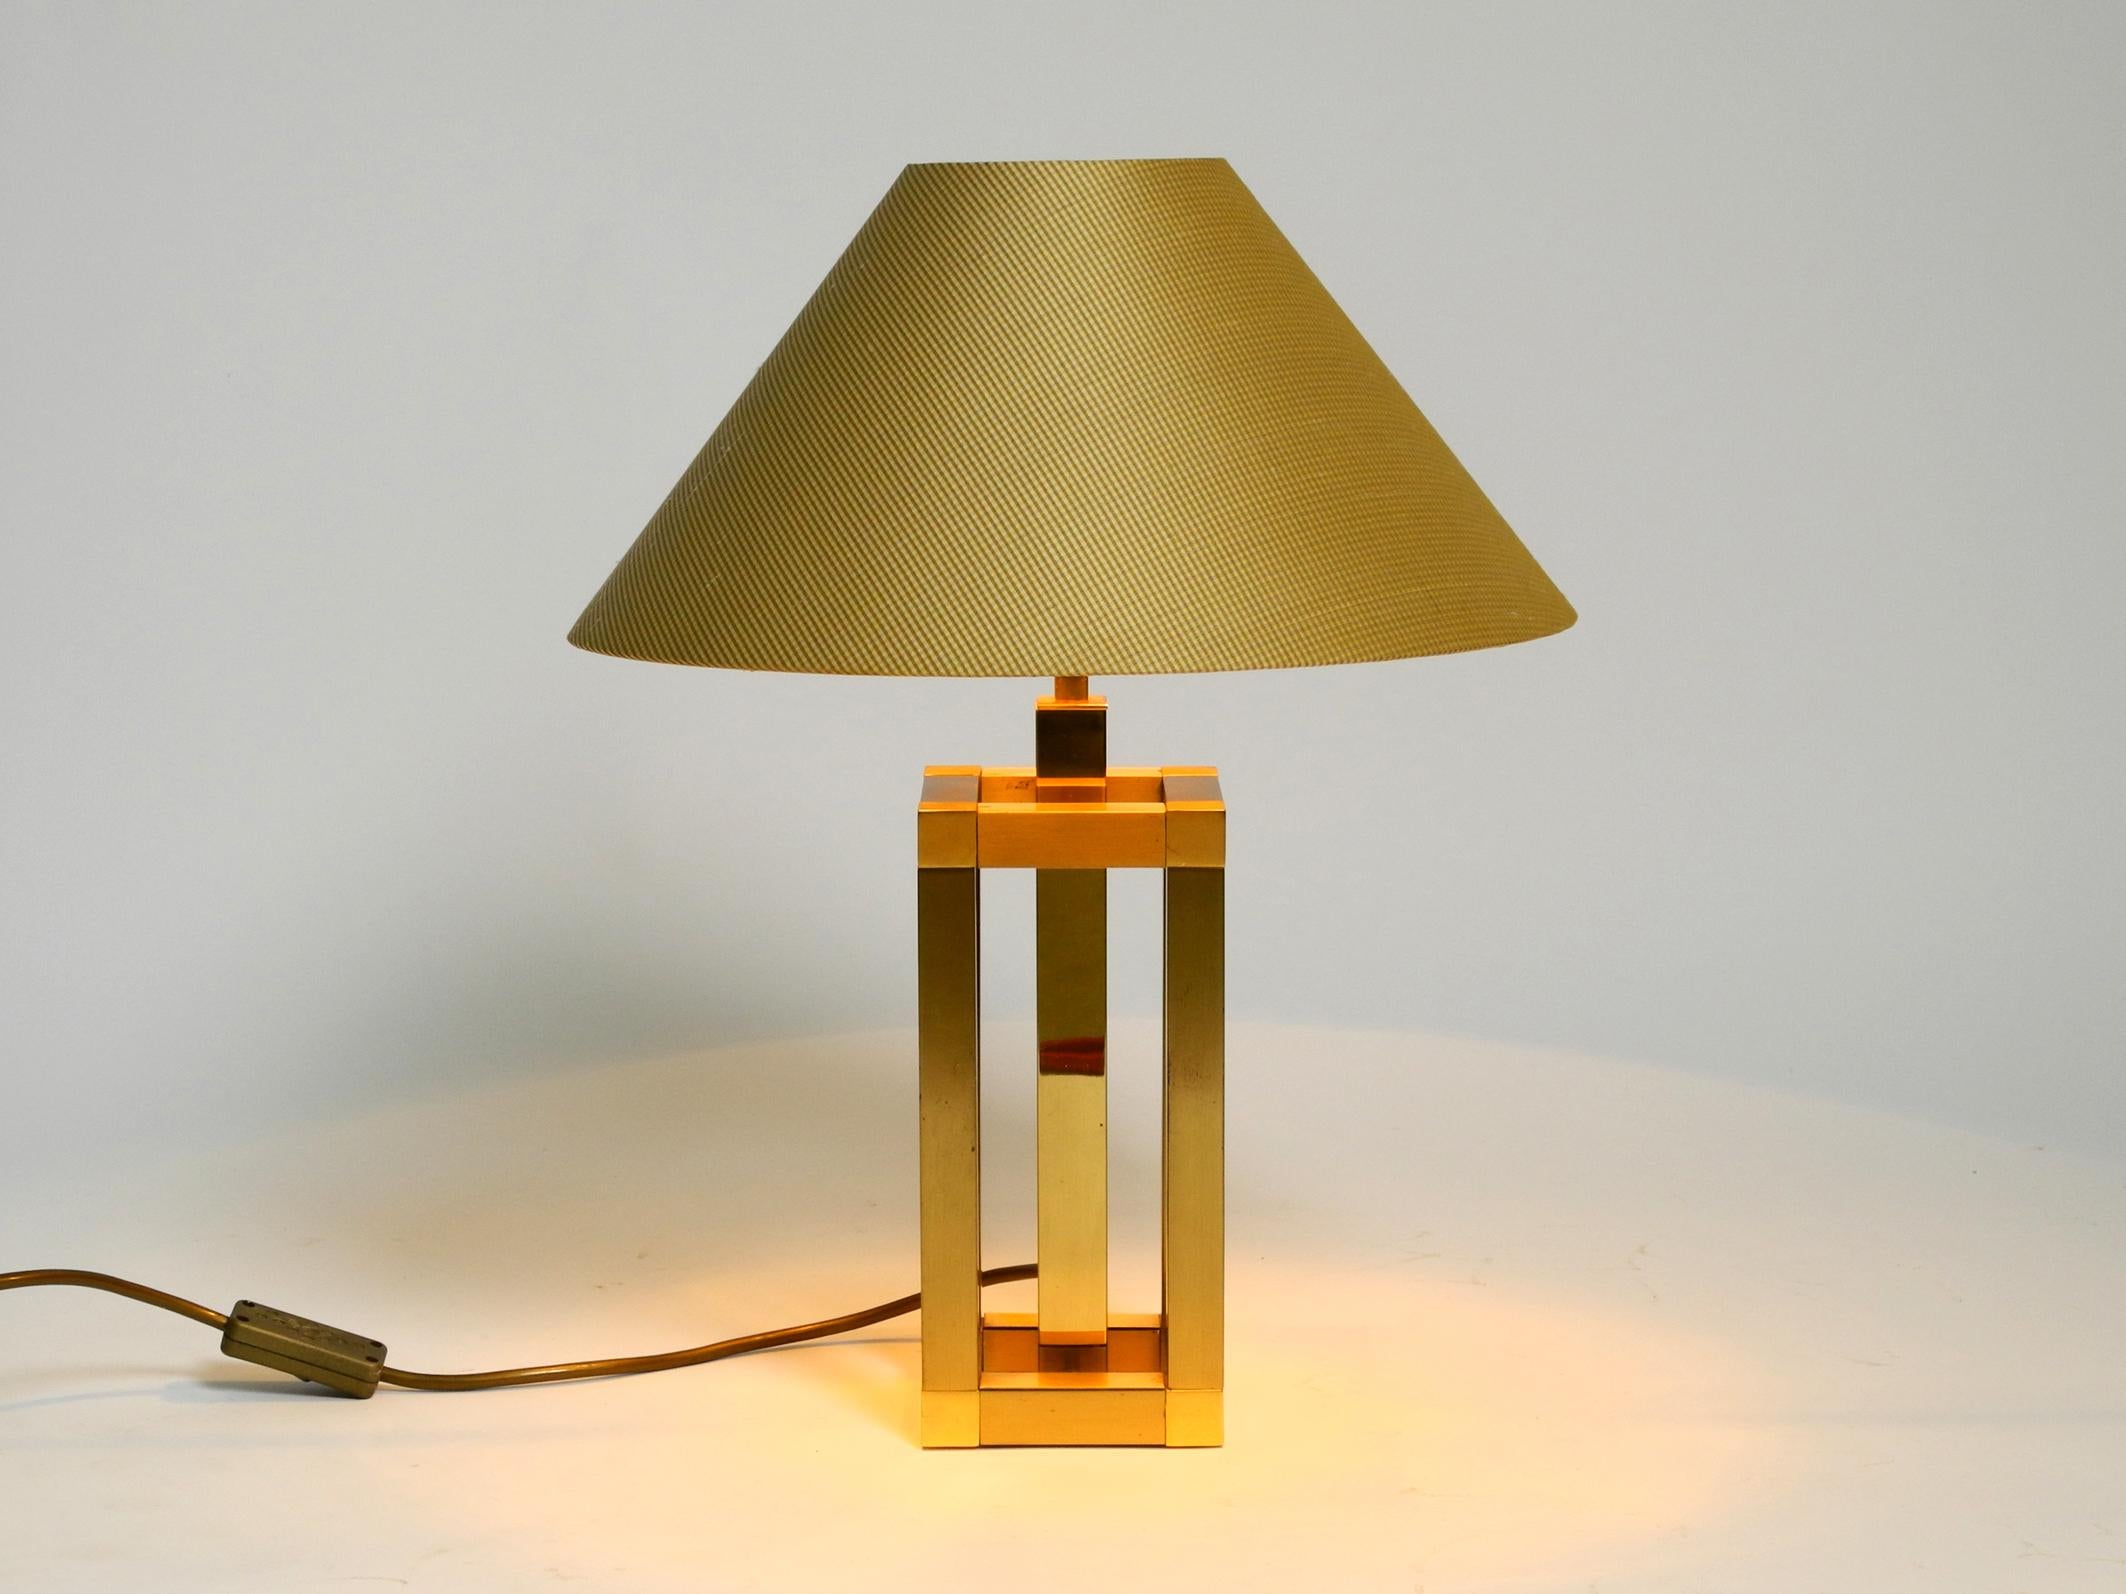 Beautiful 1970s Regency design brass table lamp.
Designed by Willy Rizzo for Lumica. Made in Italy.
Lamp made entirely of brass.
Great Hollywood Regency design in very good vintage condition. Very few signs of use
The high-quality fabric shade